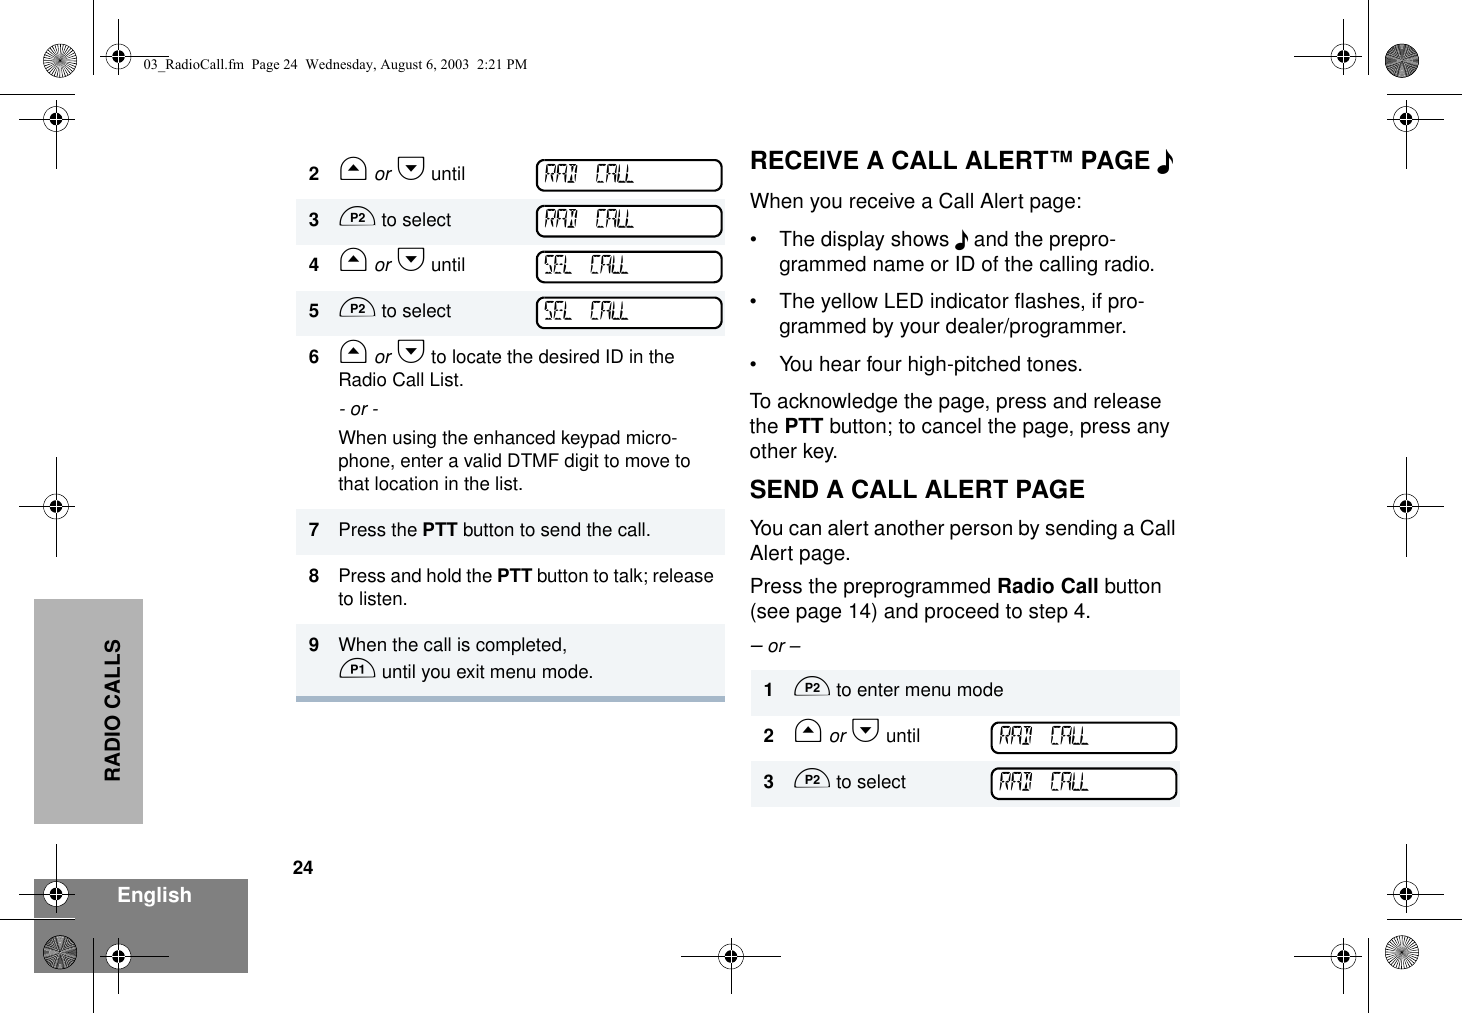 24EnglishRADIO CALLSRECEIVE A CALL ALERT™ PAGE FWhen you receive a Call Alert page:• The display shows F and the prepro-grammed name or ID of the calling radio.• The yellow LED indicator flashes, if pro-grammed by your dealer/programmer. • You hear four high-pitched tones.To acknowledge the page, press and release the PTT button; to cancel the page, press any other key.SEND A CALL ALERT PAGEYou can alert another person by sending a Call Alert page.Press the preprogrammed Radio Call button (see page 14) and proceed to step 4.– or –2G or H until3D to select4G or H until5D to select6G or H to locate the desired ID in the Radio Call List.- or -When using the enhanced keypad micro-phone, enter a valid DTMF digit to move to that location in the list.7Press the PTT button to send the call.8Press and hold the PTT button to talk; release to listen.9When the call is completed, C until you exit menu mode.RAD CALLRAD CALLSEL CALLSEL CALL1D to enter menu mode2G or H until3D to selectRAD CALLRAD CALL03_RadioCall.fm  Page 24  Wednesday, August 6, 2003  2:21 PM